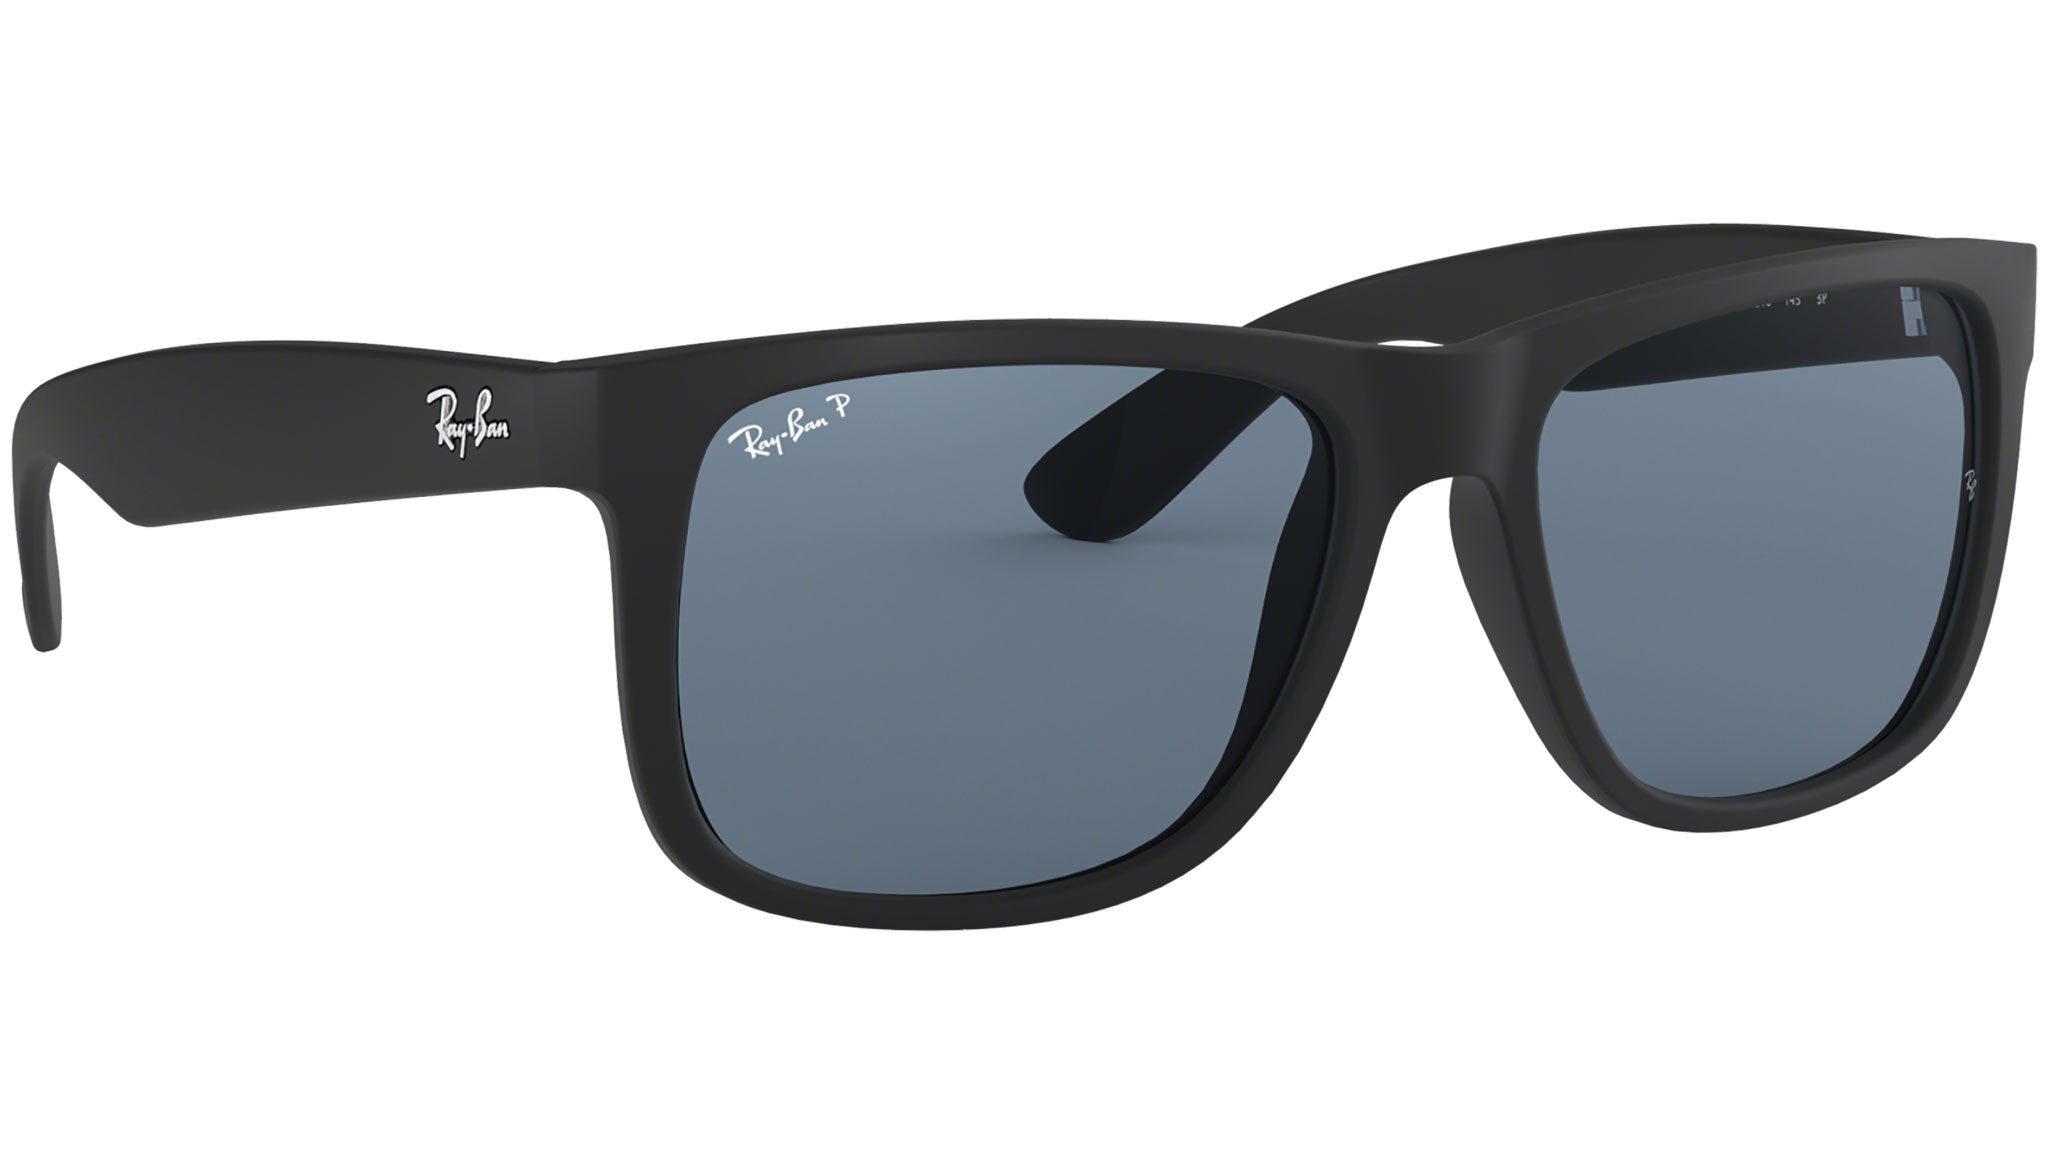 JUSTIN CLASSIC Sunglasses in Black and Blue - RB4165